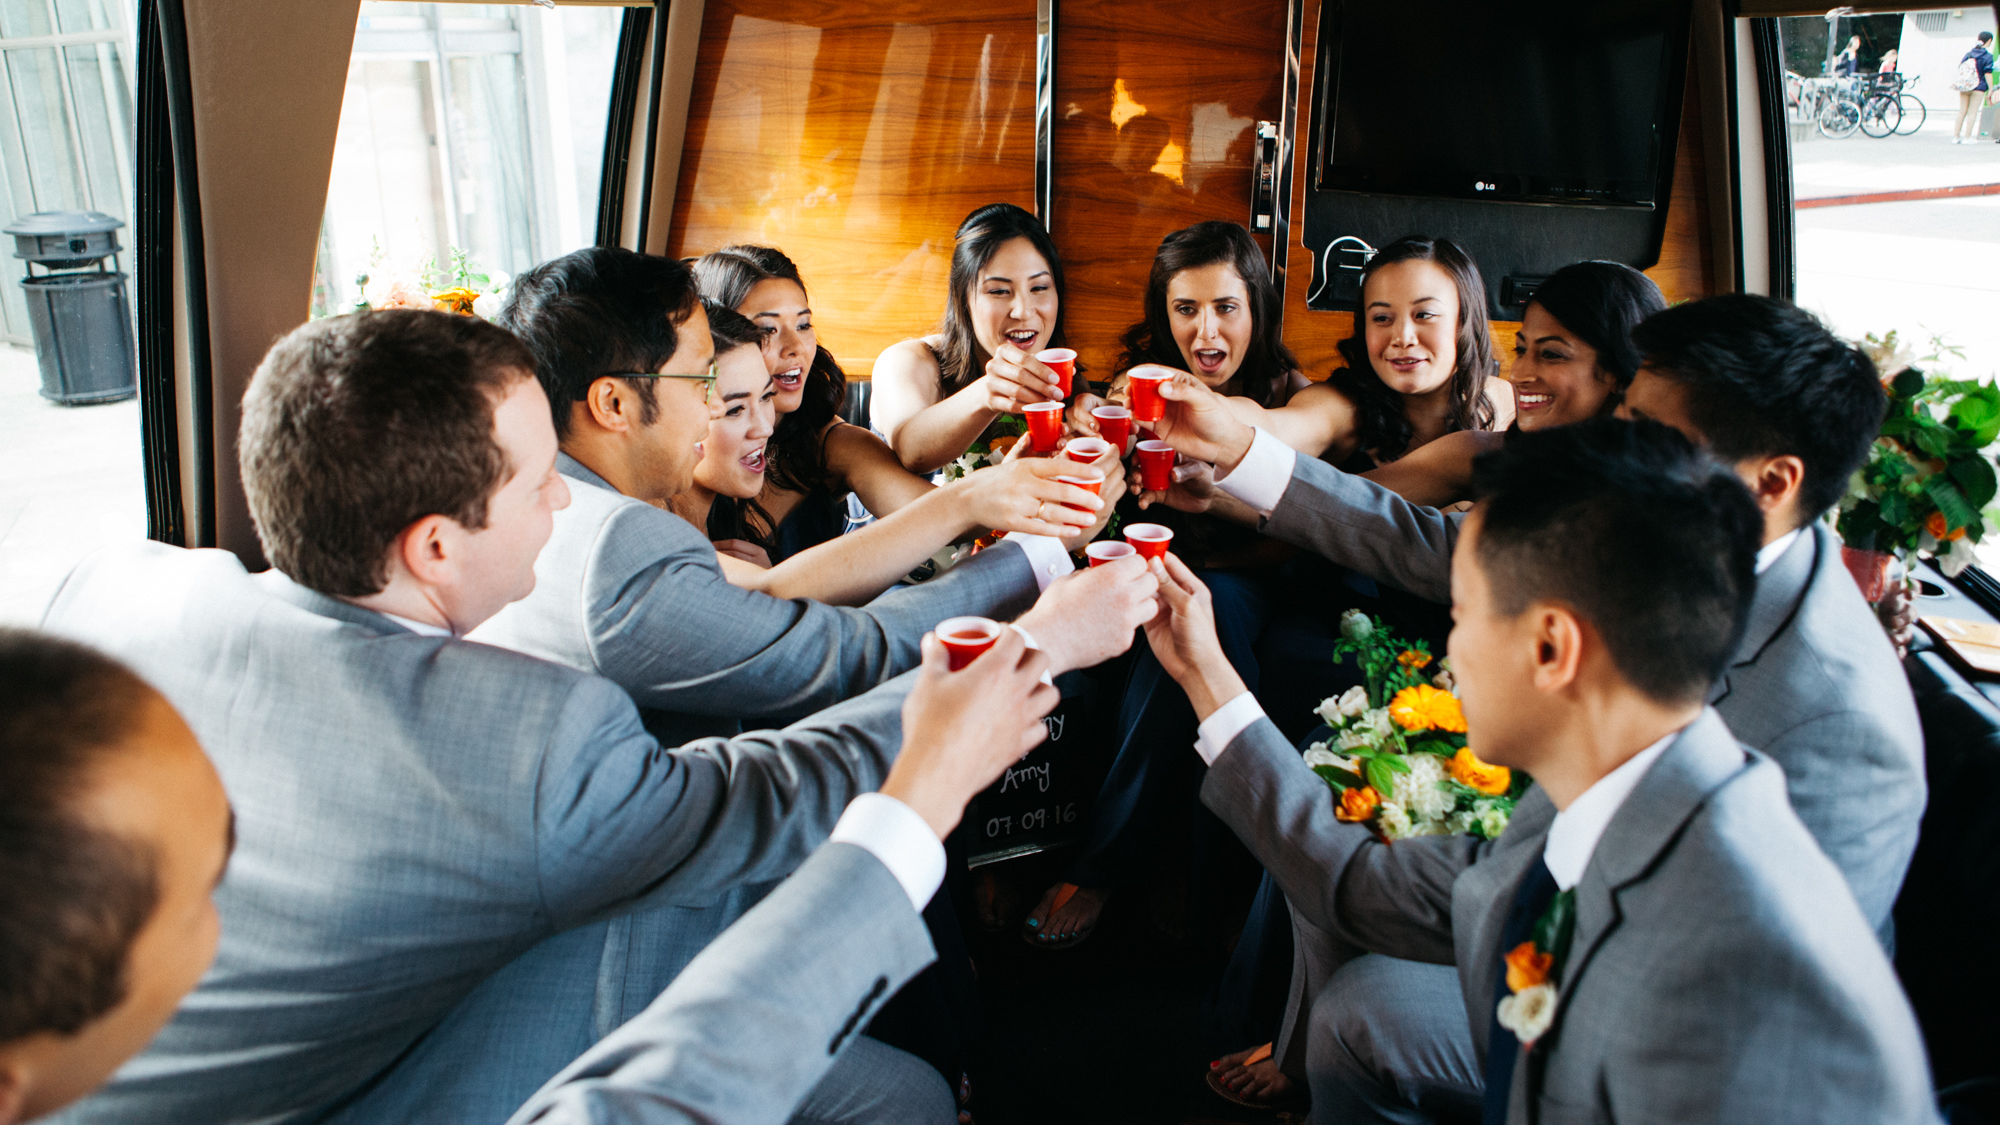 Bridesmaids and groomsmen toast the bride and groom as they take the stretch to Chihuly Garden and Glass